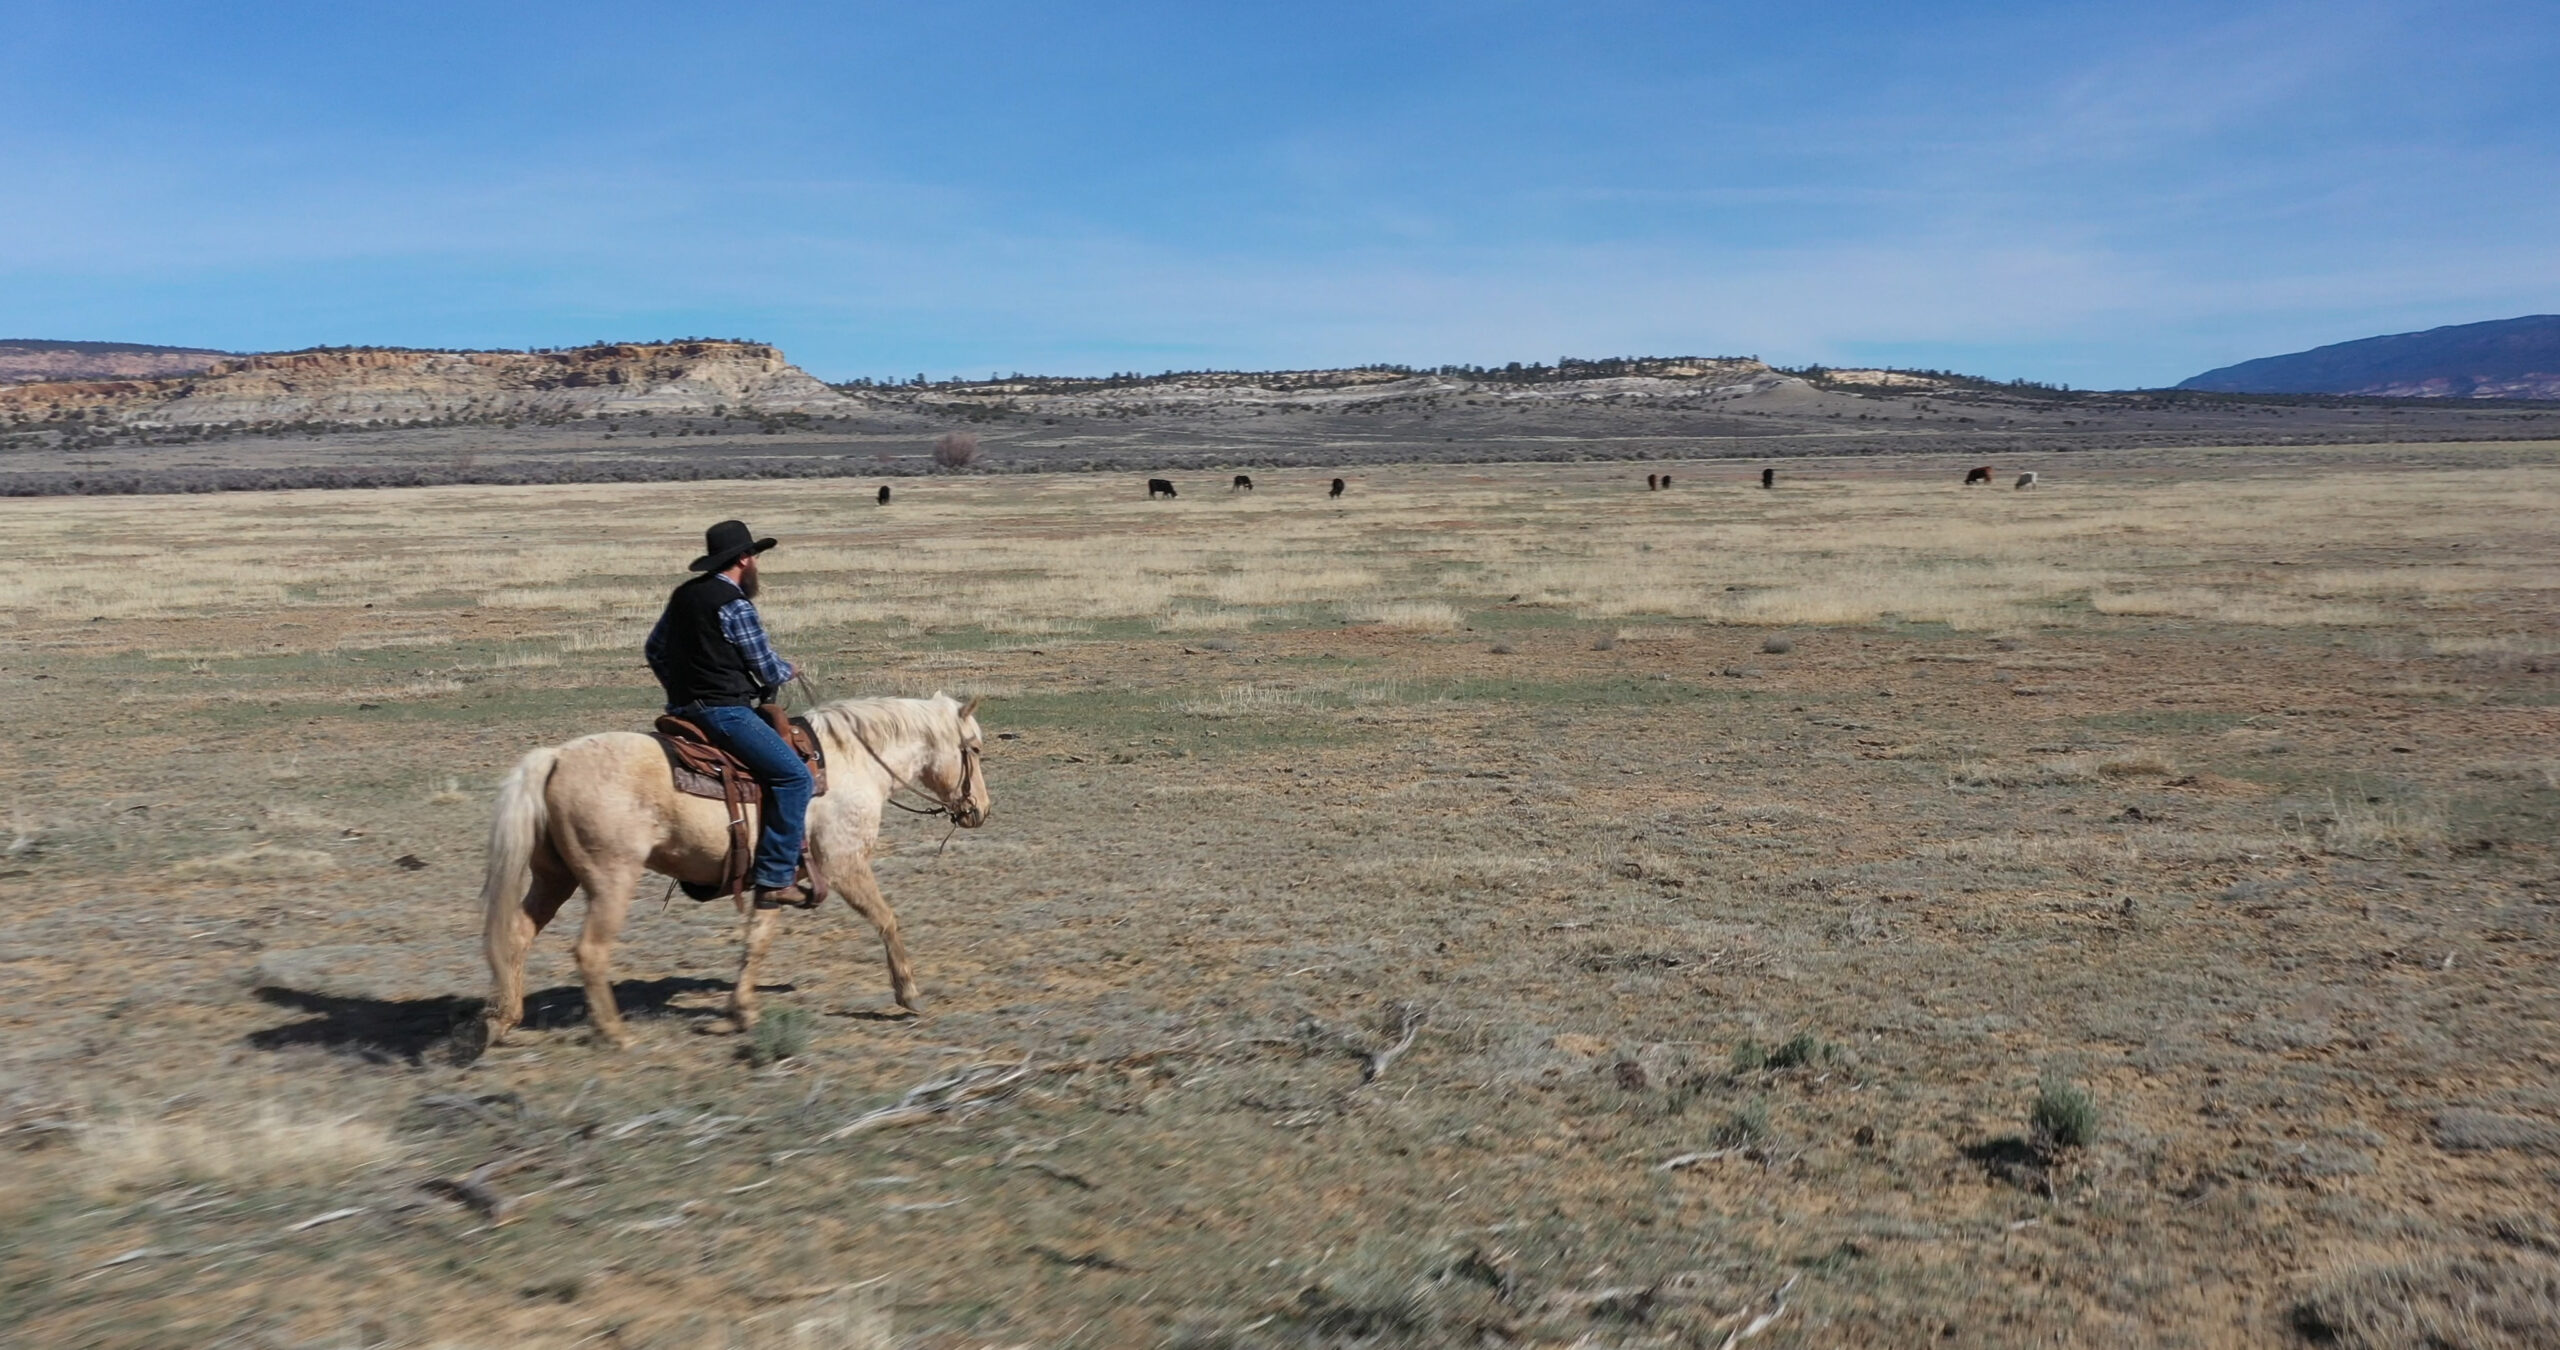 A man sits on a horse in the middle of an open desert field.